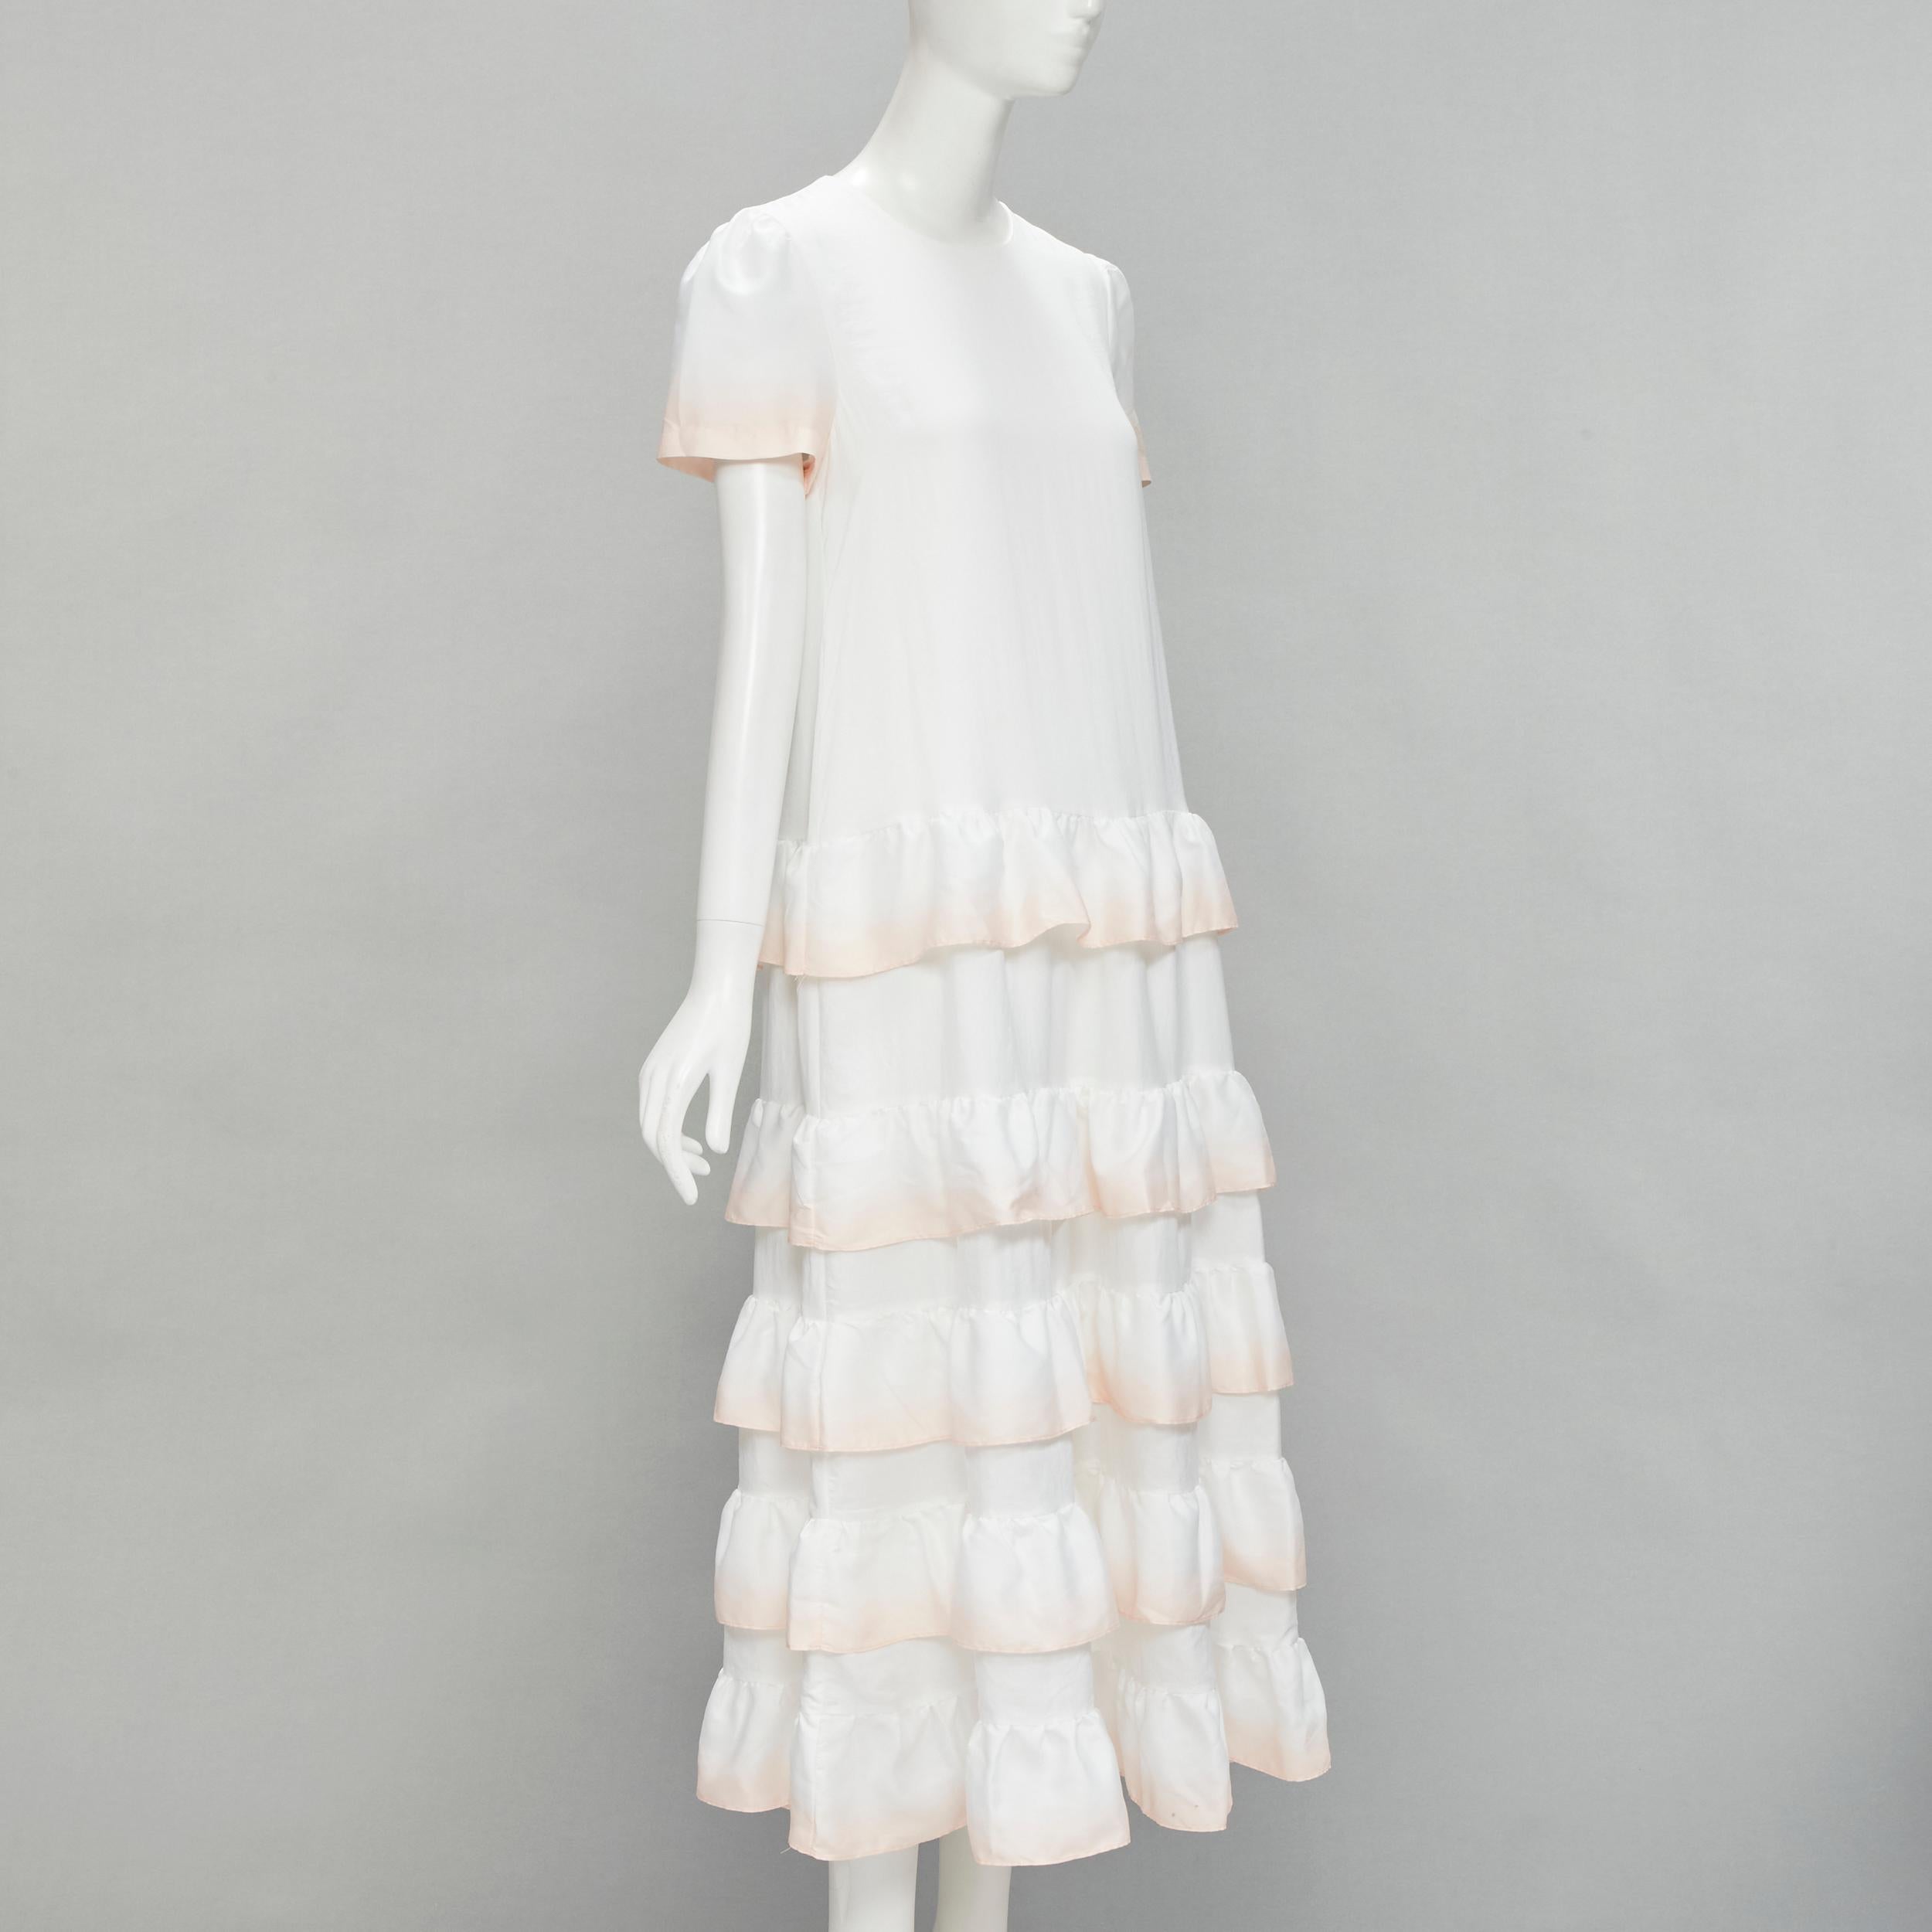 MAJE white pink dip dye ruffle petal tiered midi dress FR38 M
Brand: Maje
Material: Polyester
Color: White
Pattern: Solid
Closure: Keyhole Button
Extra Detail: Light beige/pink dip dye at sleeve and at ruffle petals.
Made in: